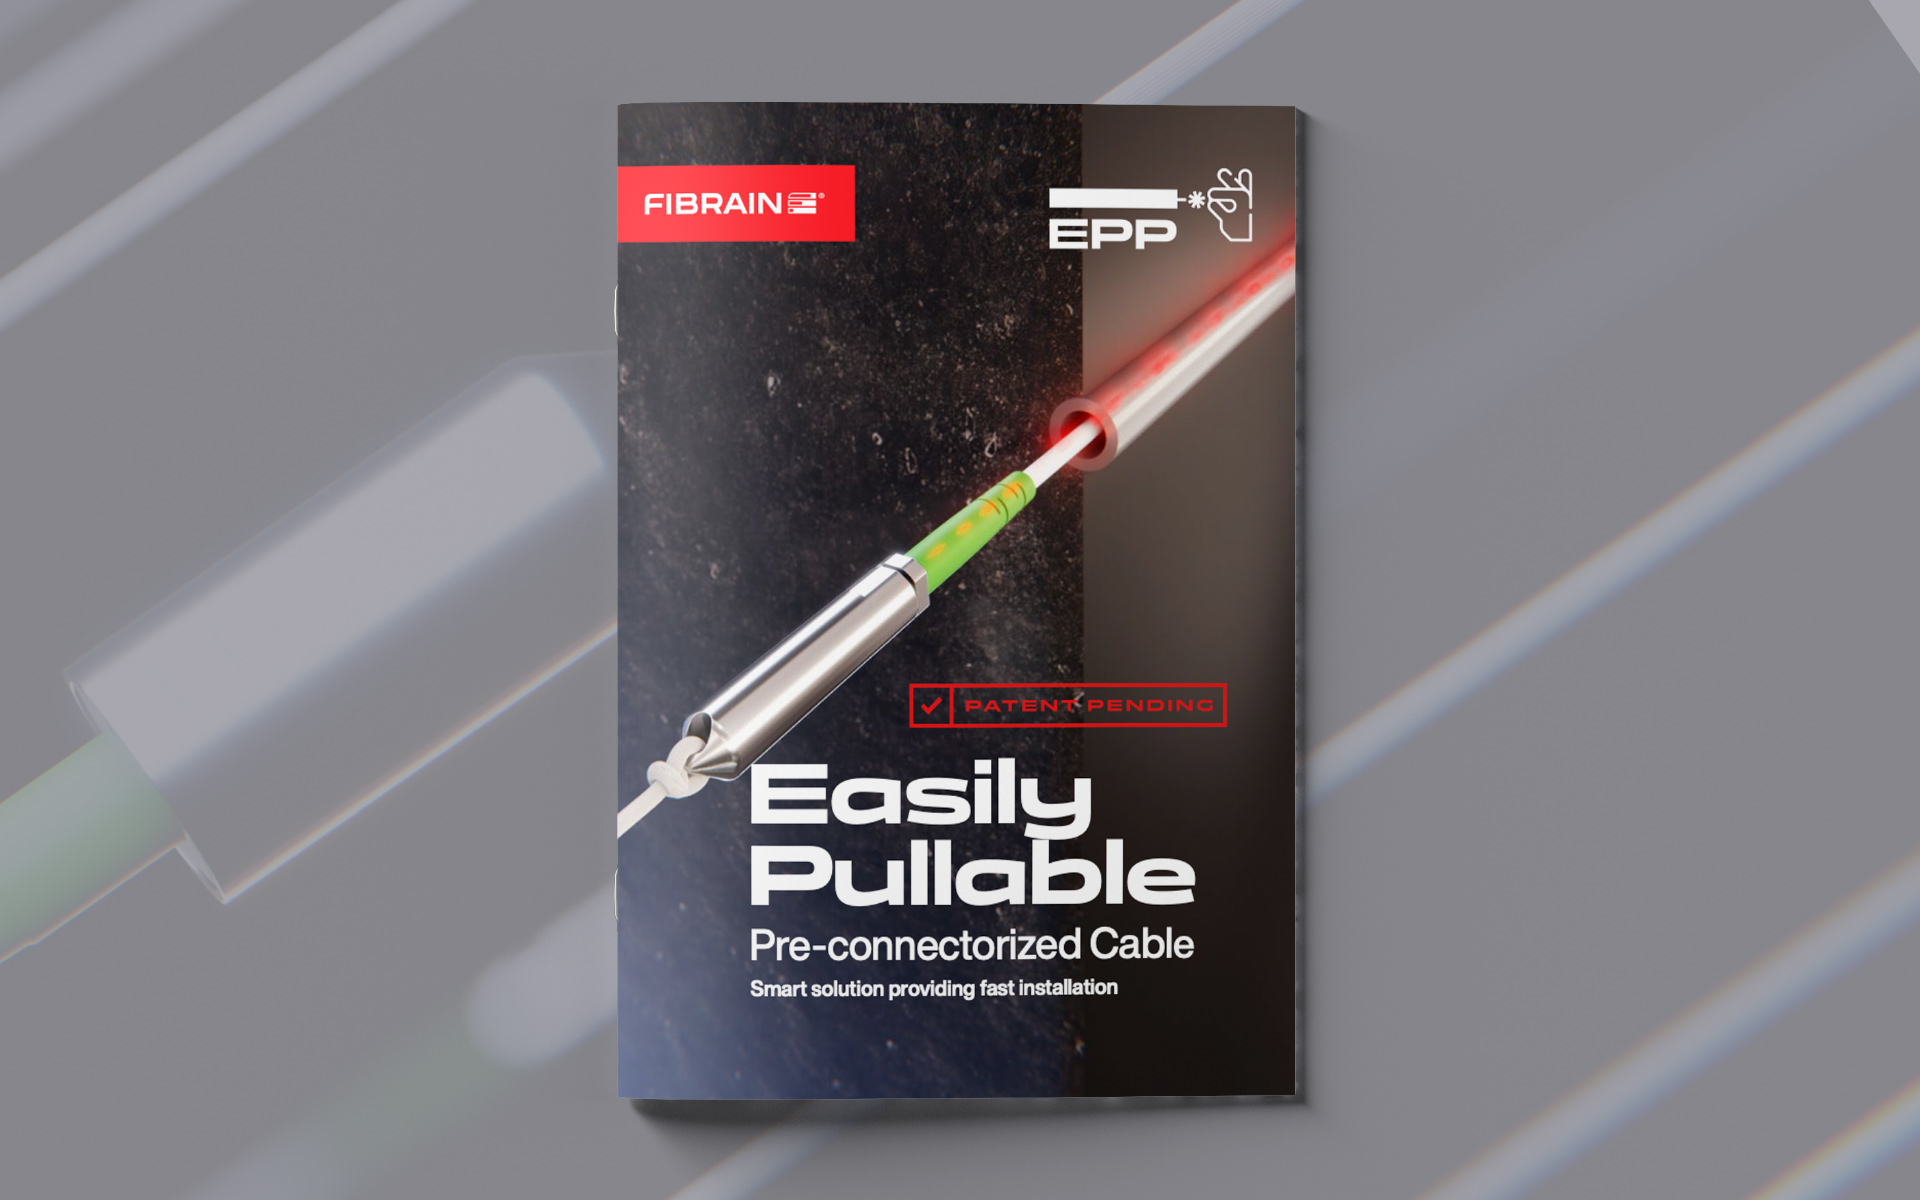 Easily Pullable Pre-Connectorized Cable – smart solution which gives fast installation.